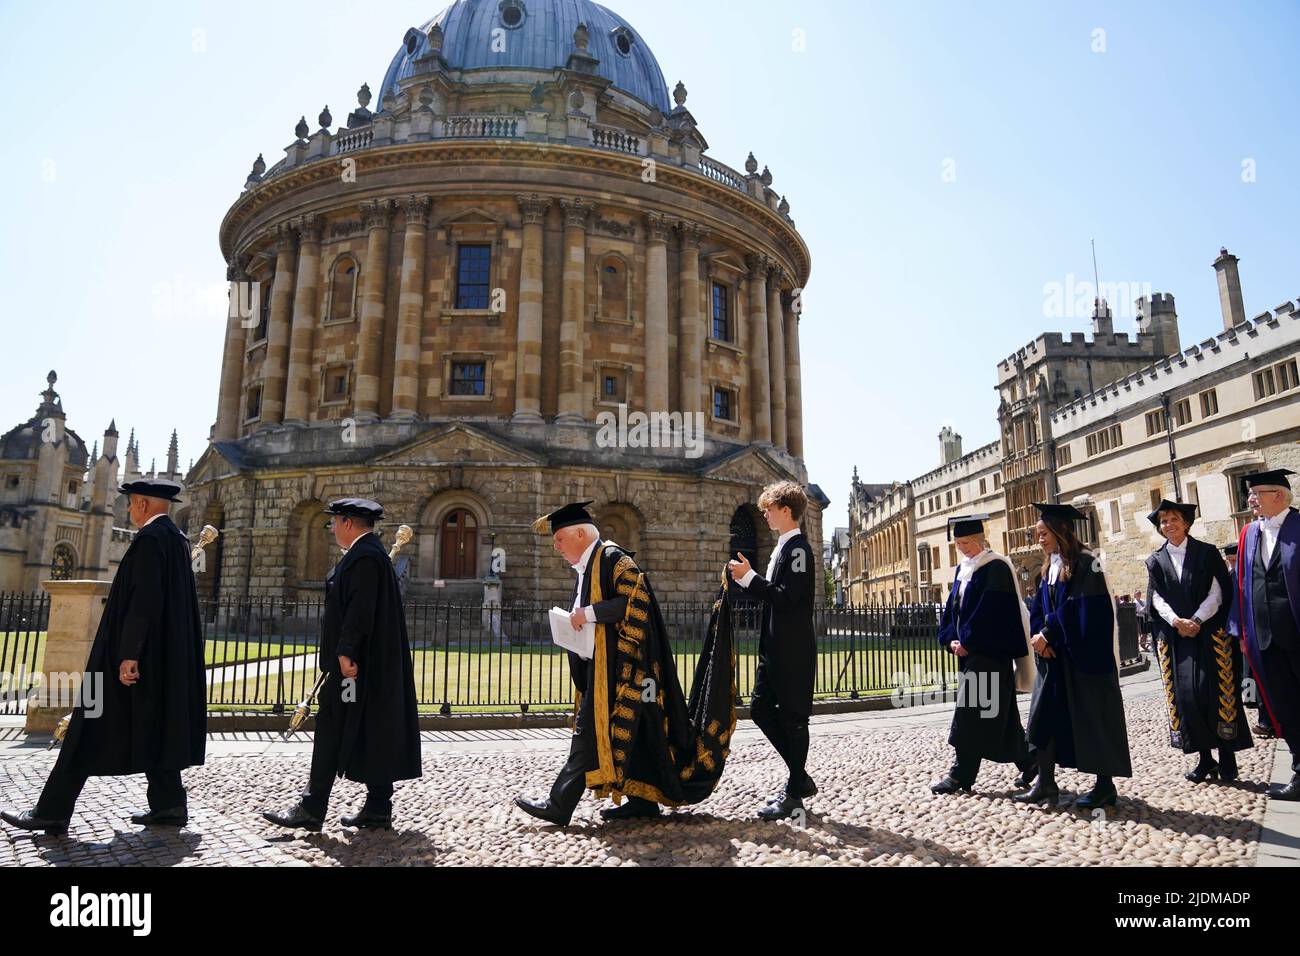 A procession makes its way to the Sheldonian Theatre, Oxford, ahead of